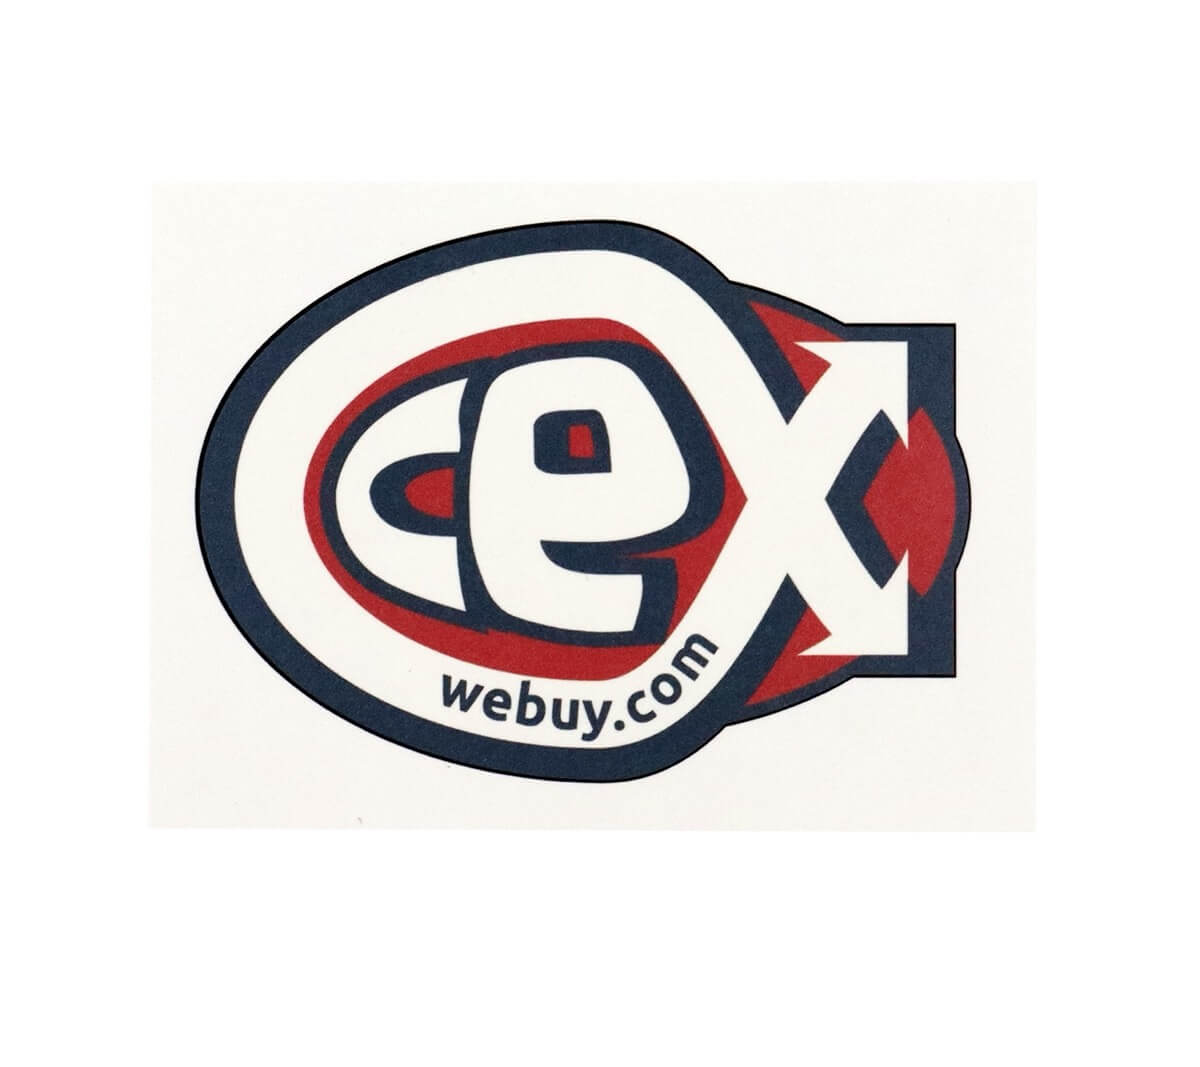 A temporary tattoo of the CEX logo